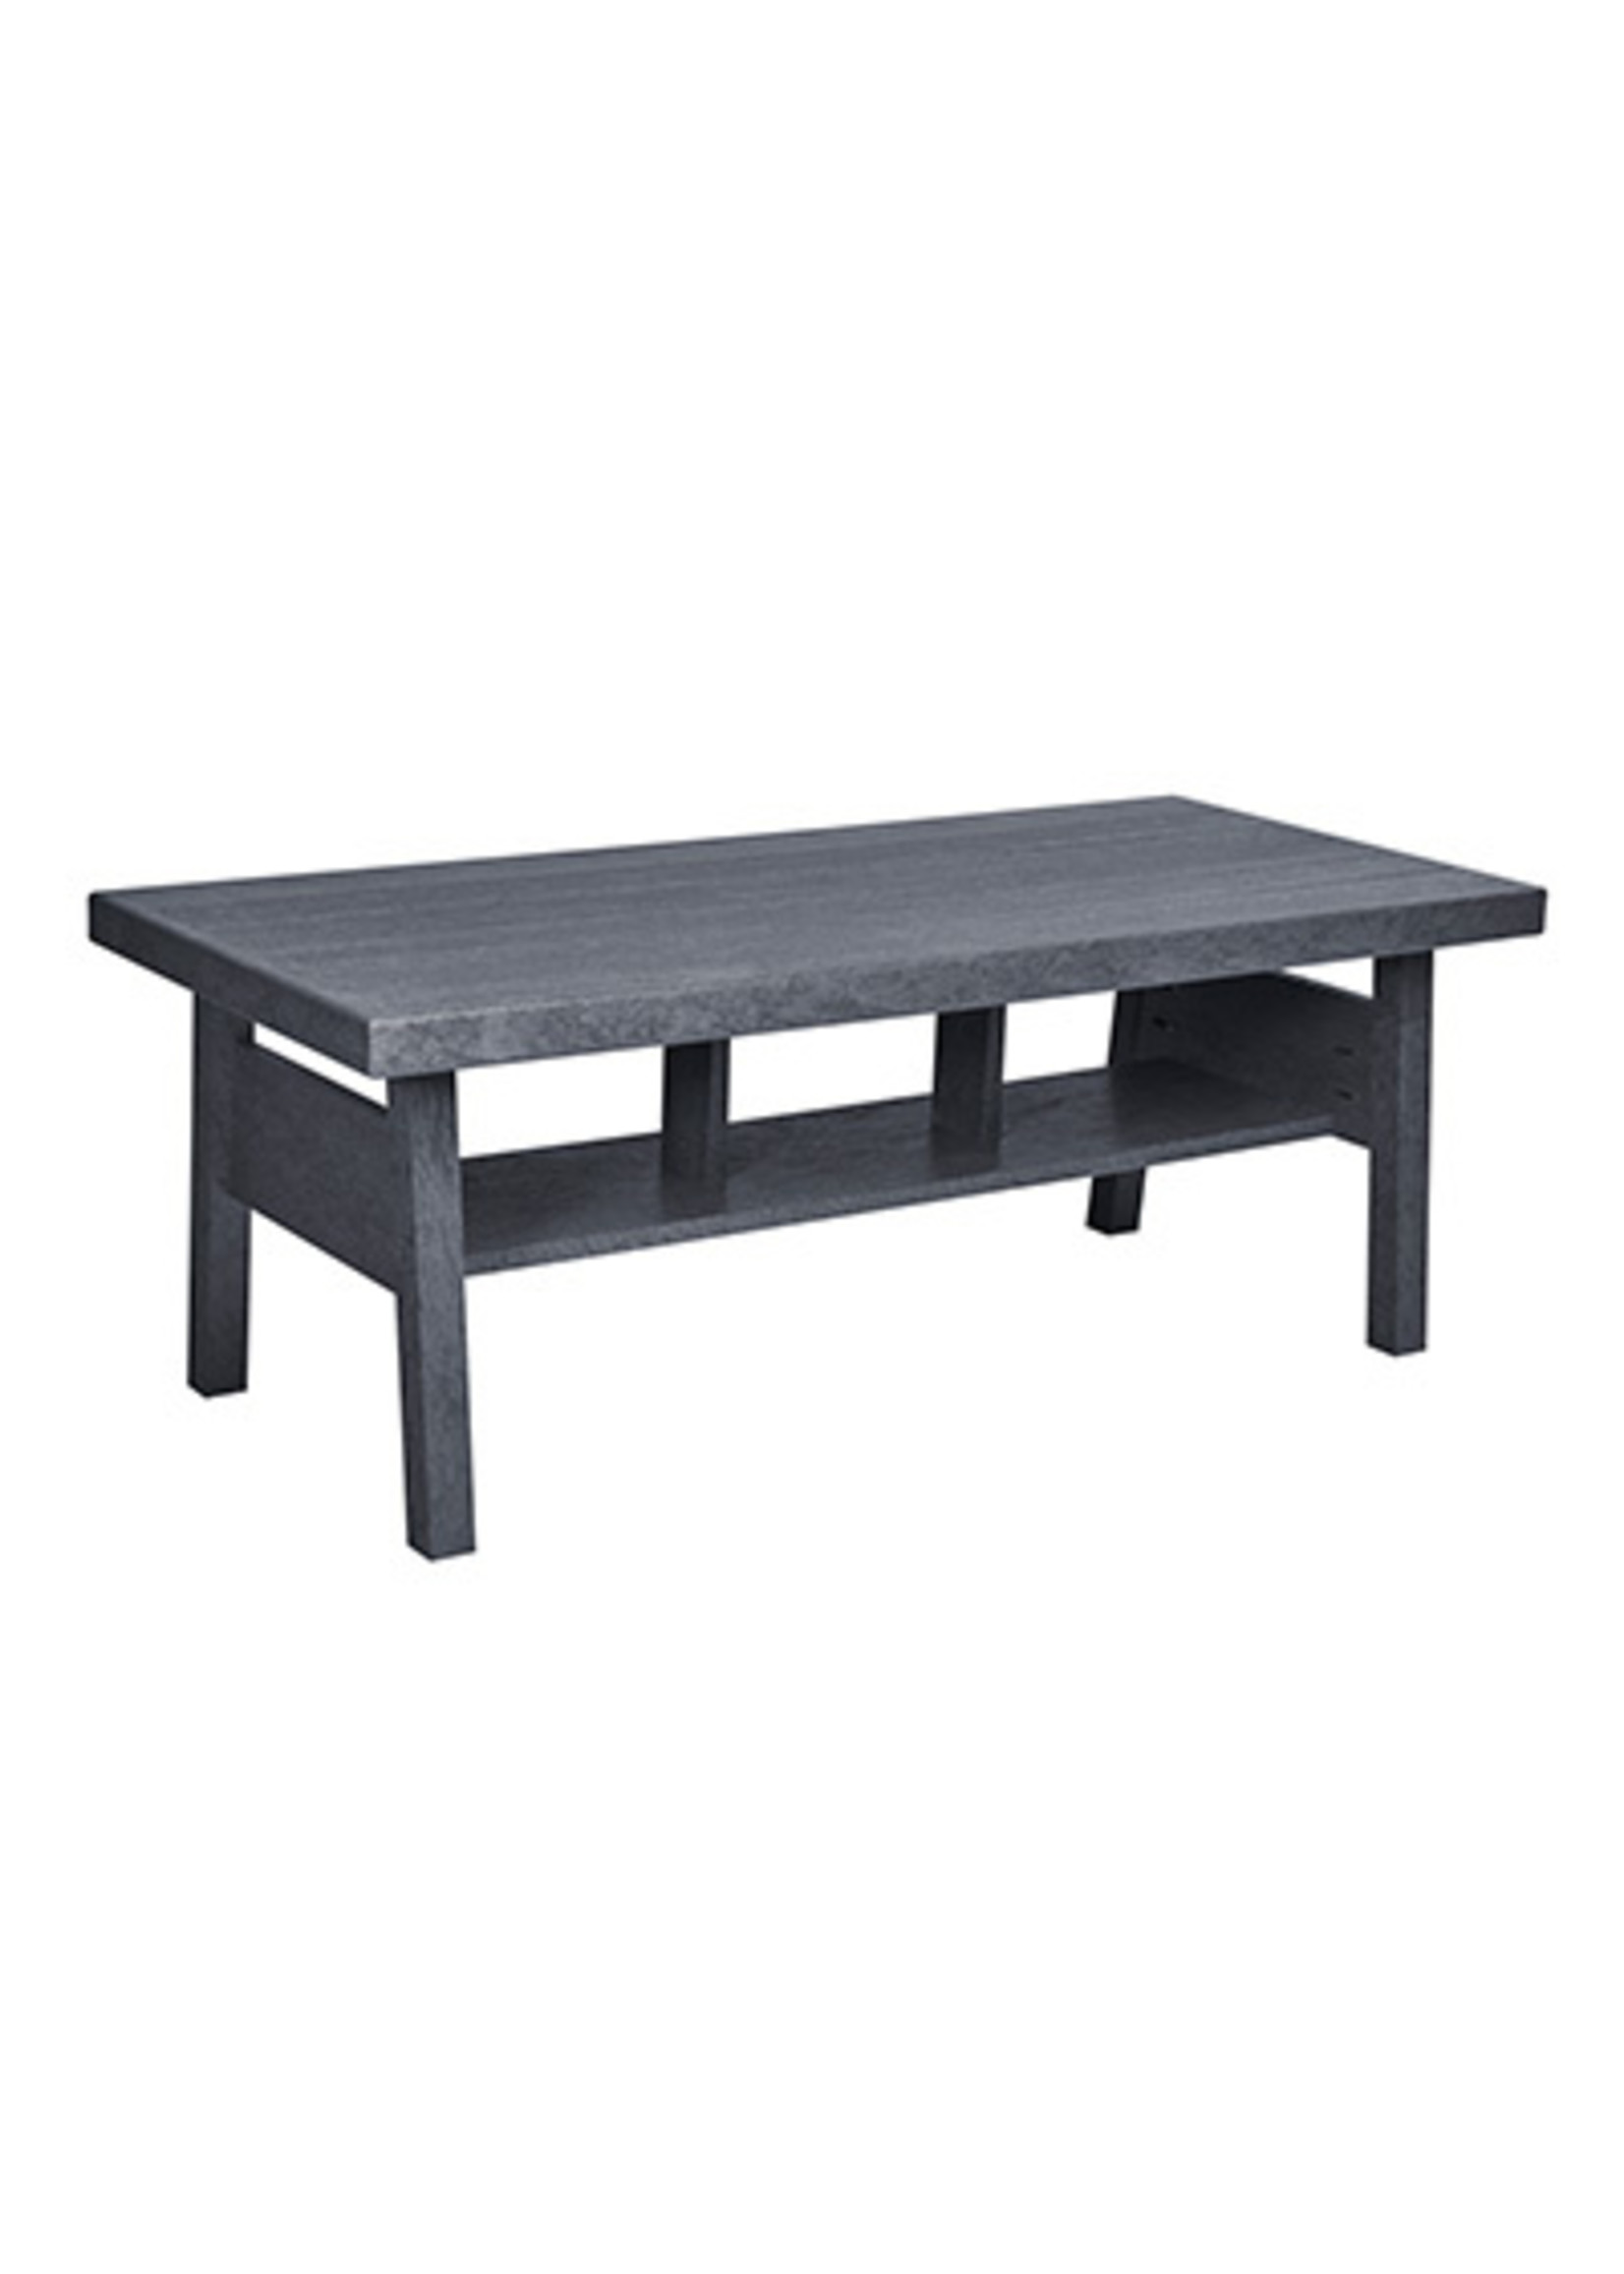 C.R. Plastic Products DST287 * Tofino Coffee Table,